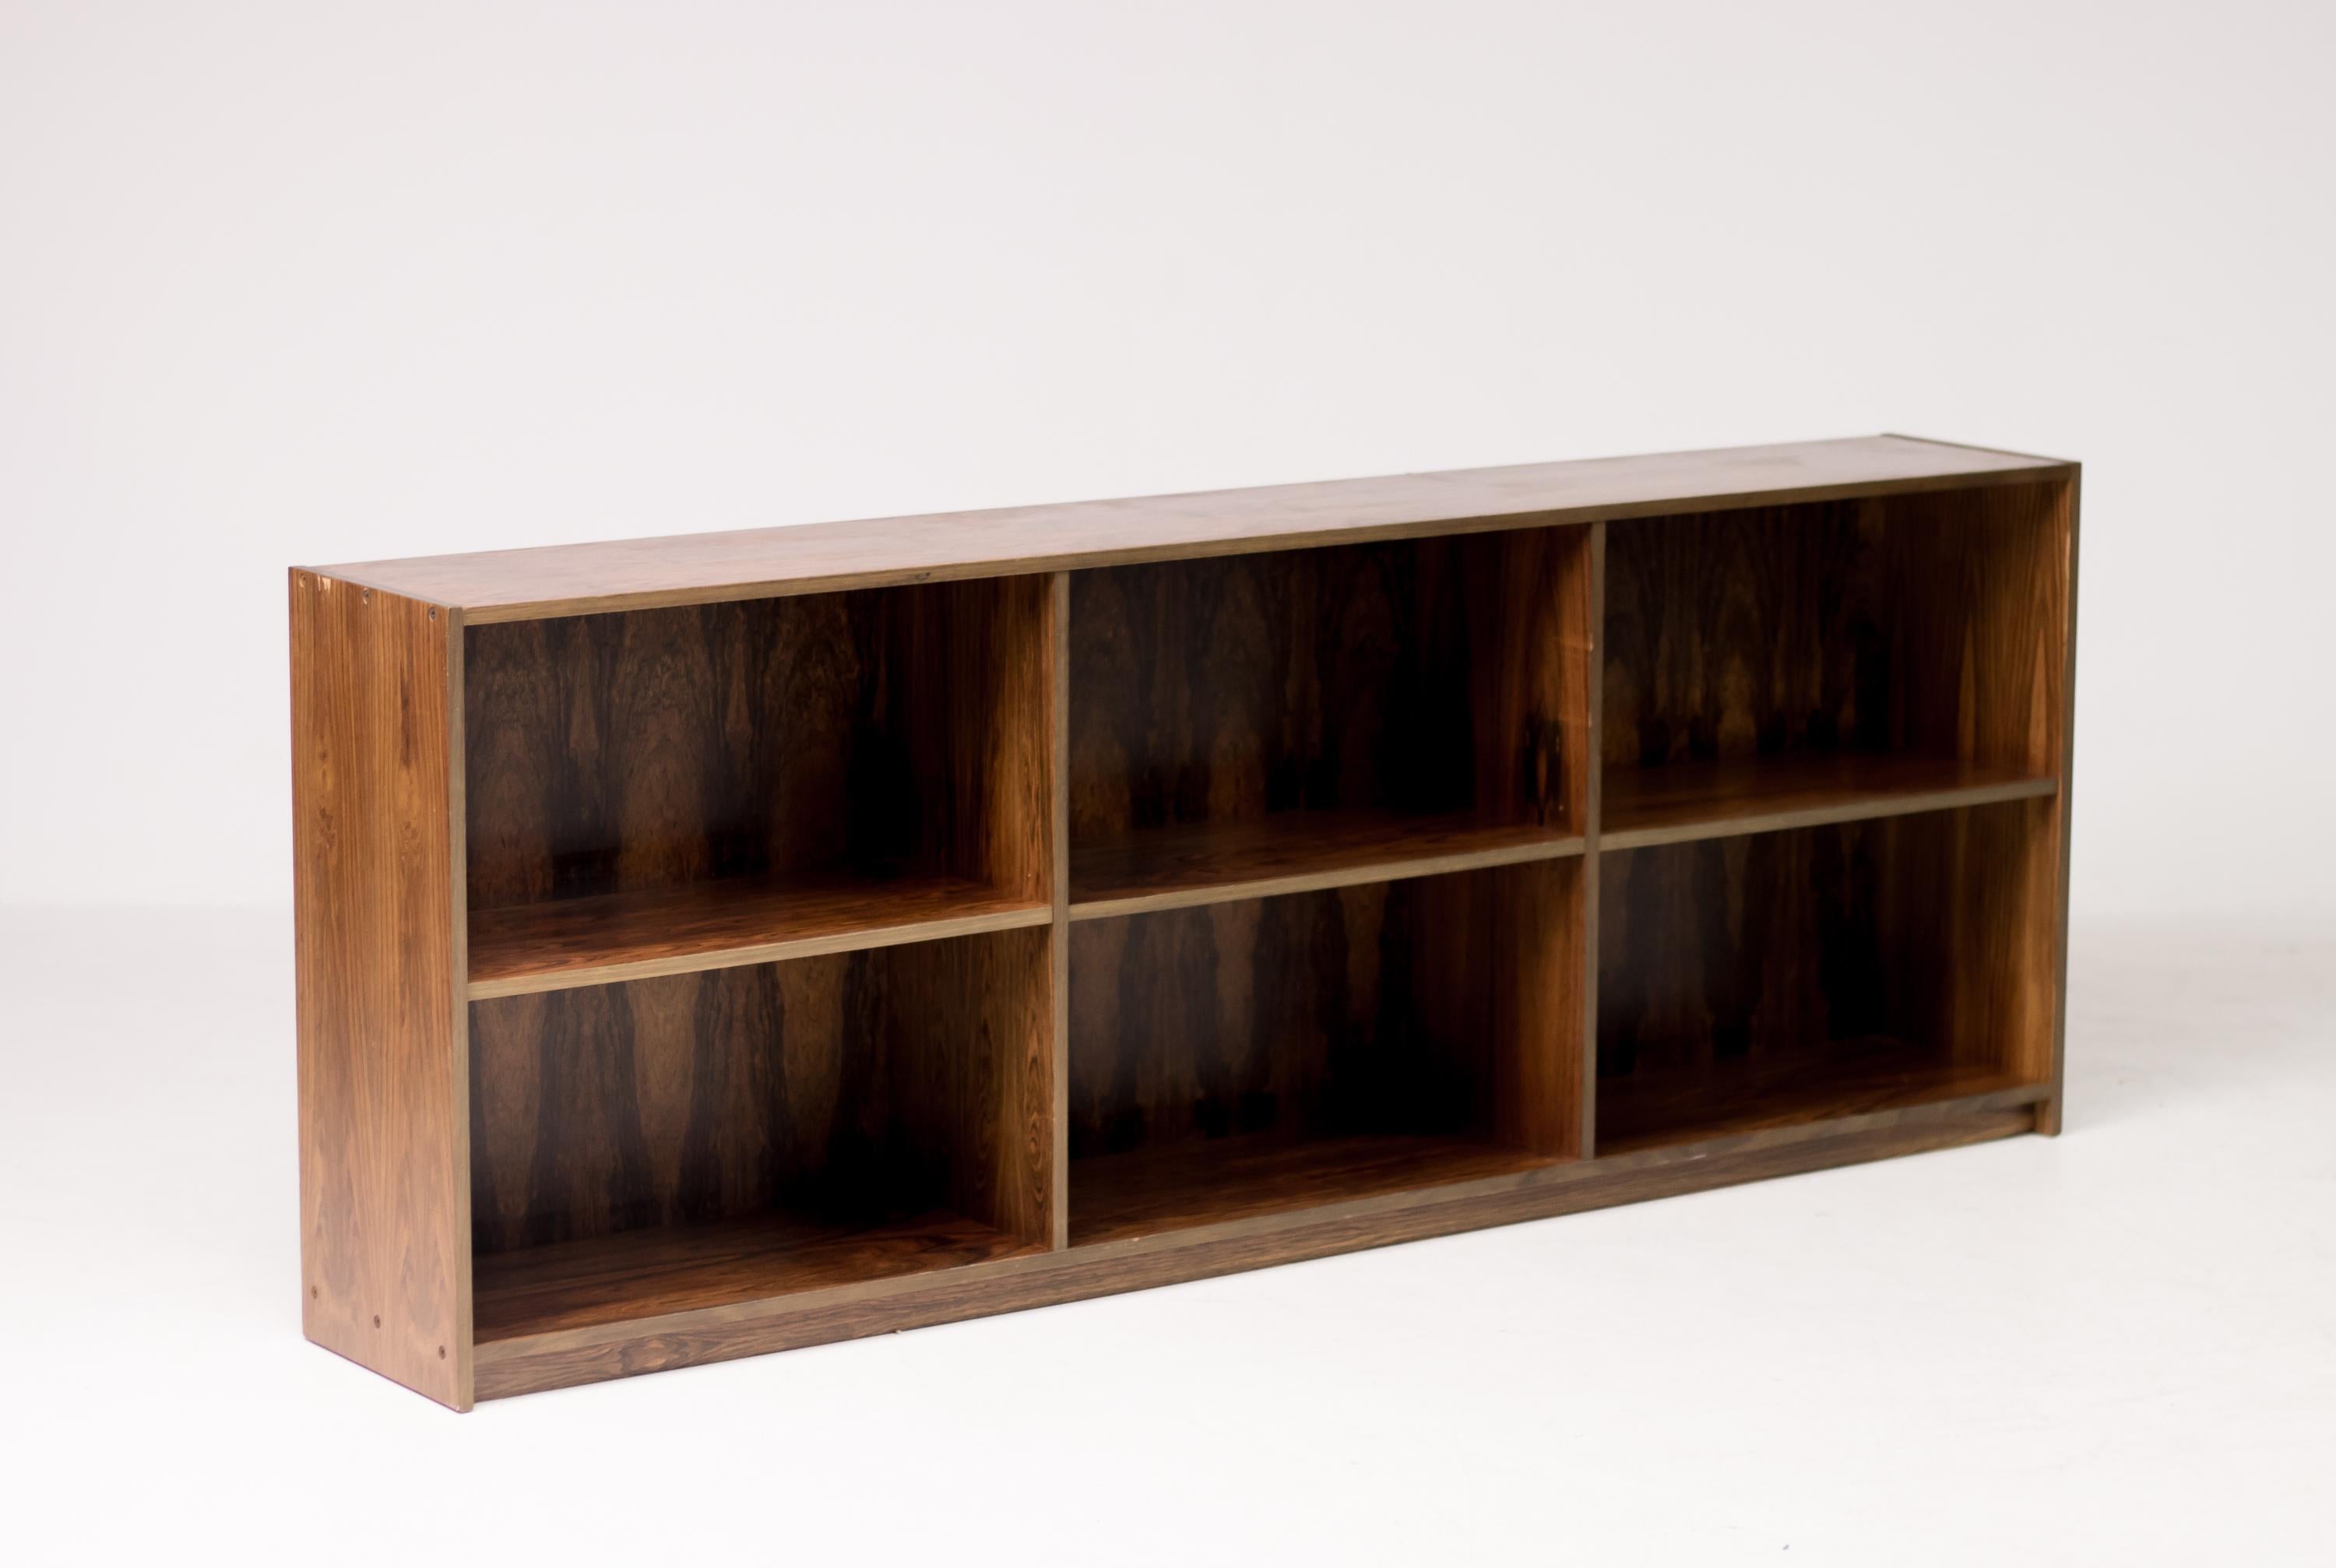 A sleek elegant and very modern Danish 1960s Brazilian rosewood bookshelf by E. Pedersen, Denmark, most likely designed by the queen of Danish modern, Bodil Kjaer. Bookmatched richly patinated rosewood, some scratches the top front edge.
Marked